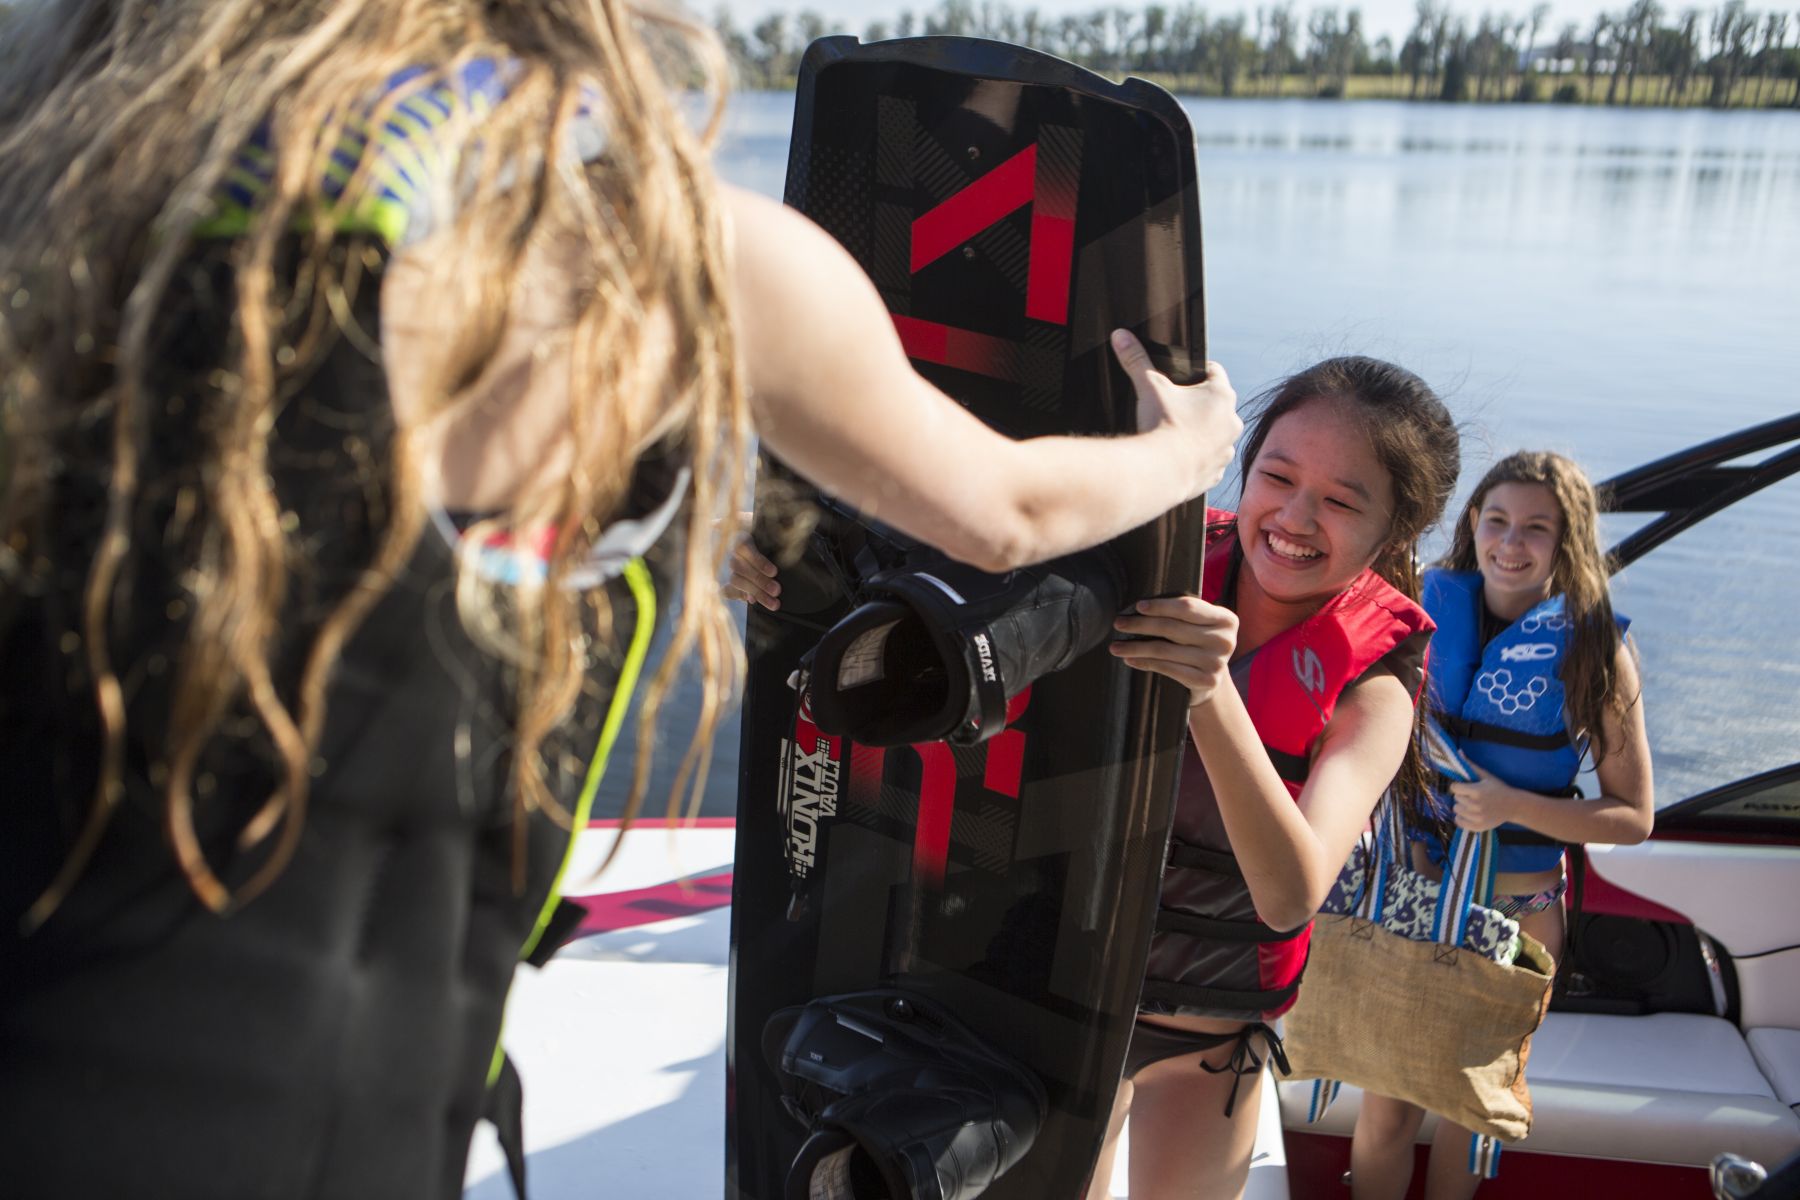 Kids unloading the boat after a day having fun on the water in properly fitting life jackets.